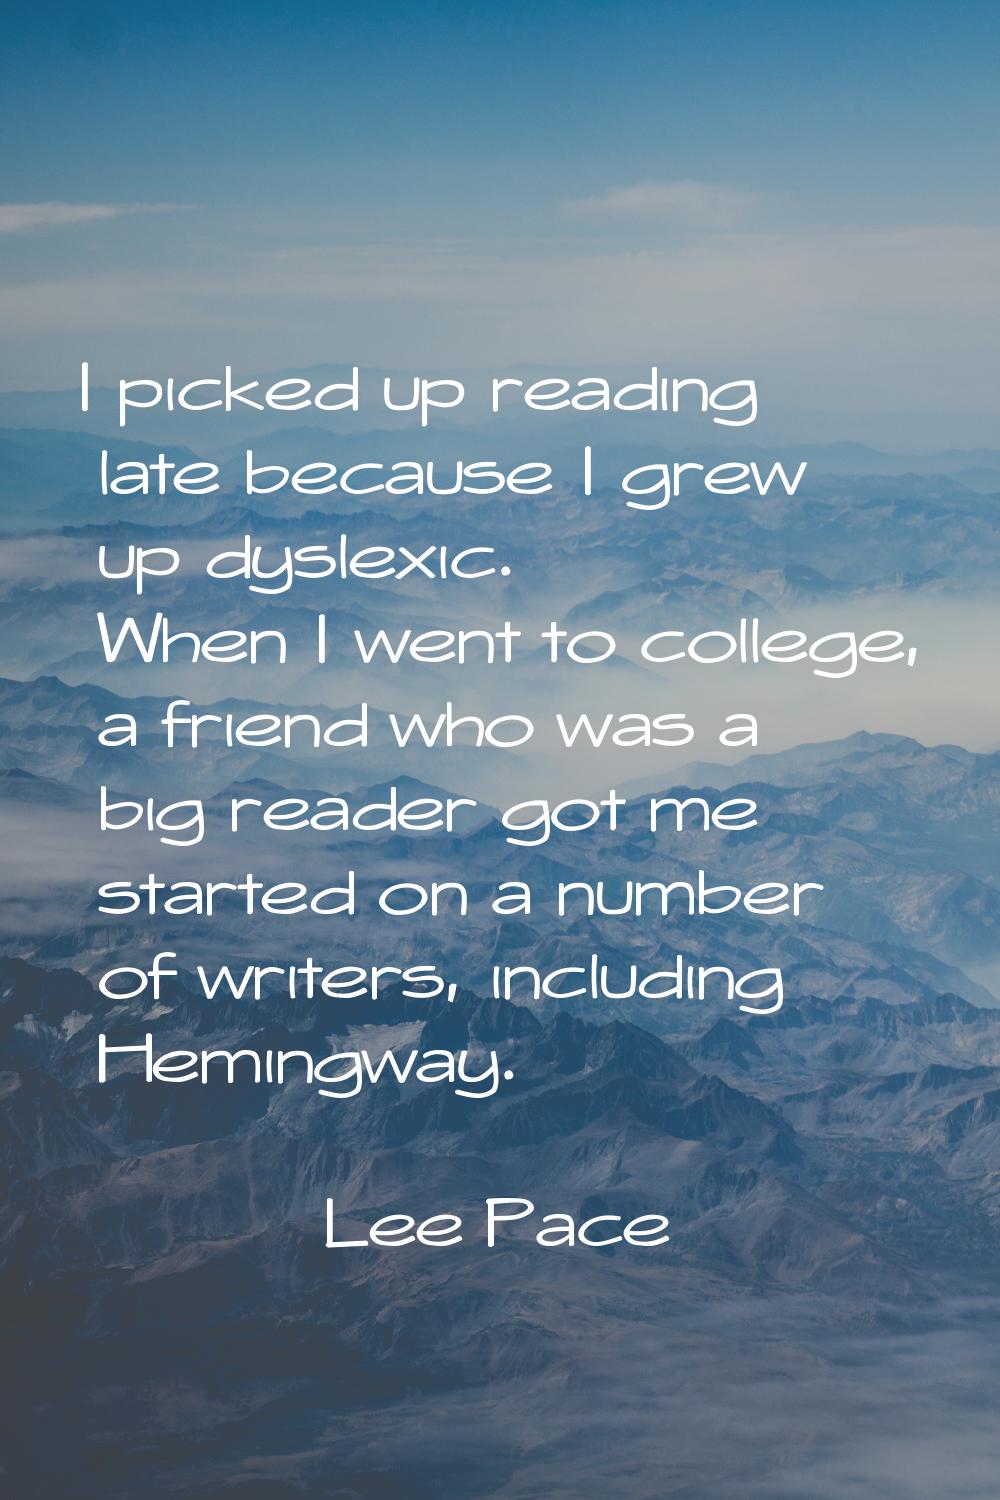 I picked up reading late because I grew up dyslexic. When I went to college, a friend who was a big